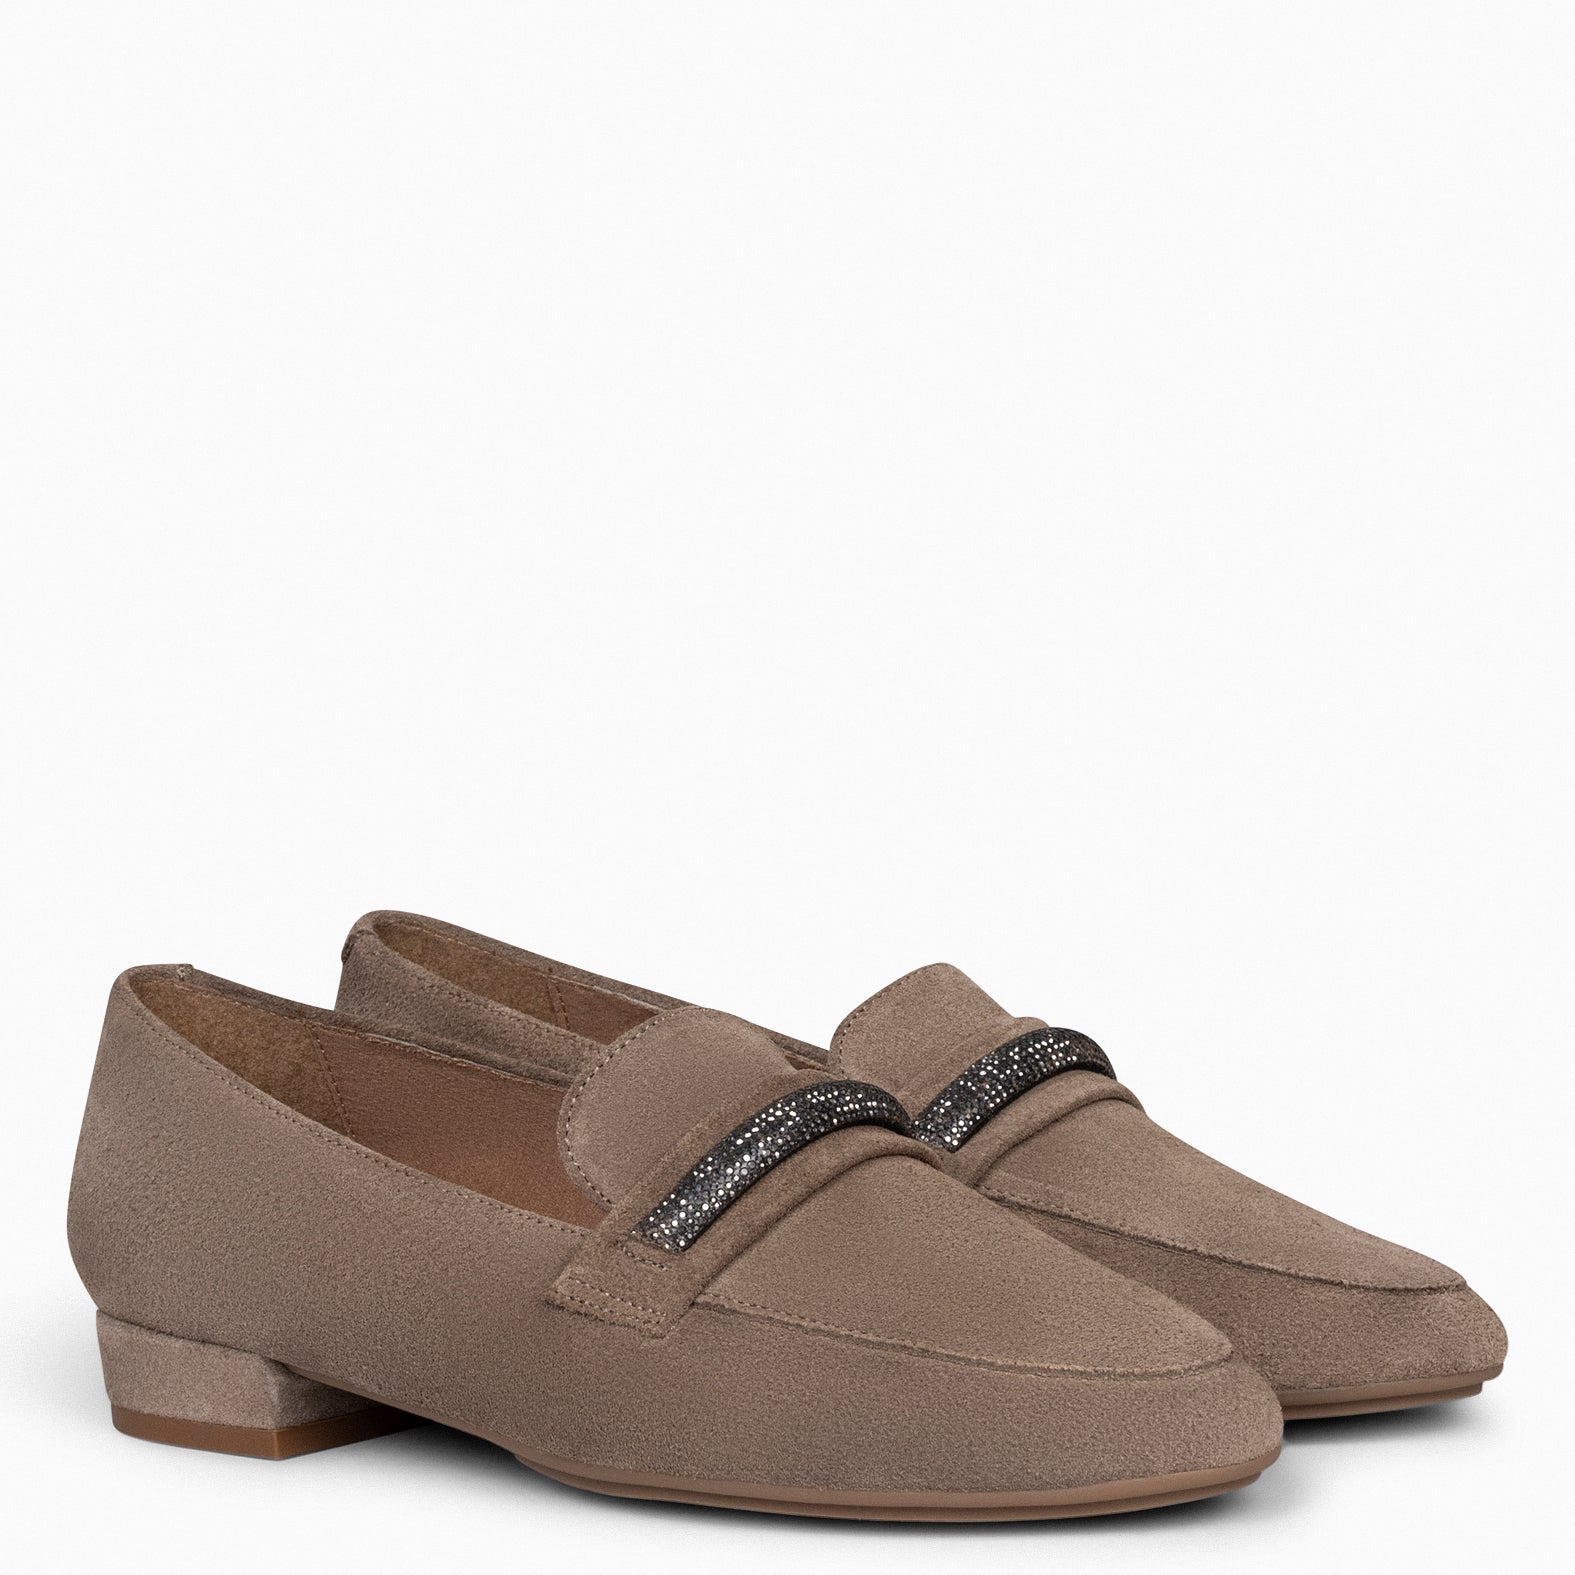 SLIPPERS BRIGHT - Chaussures plates TAUPE